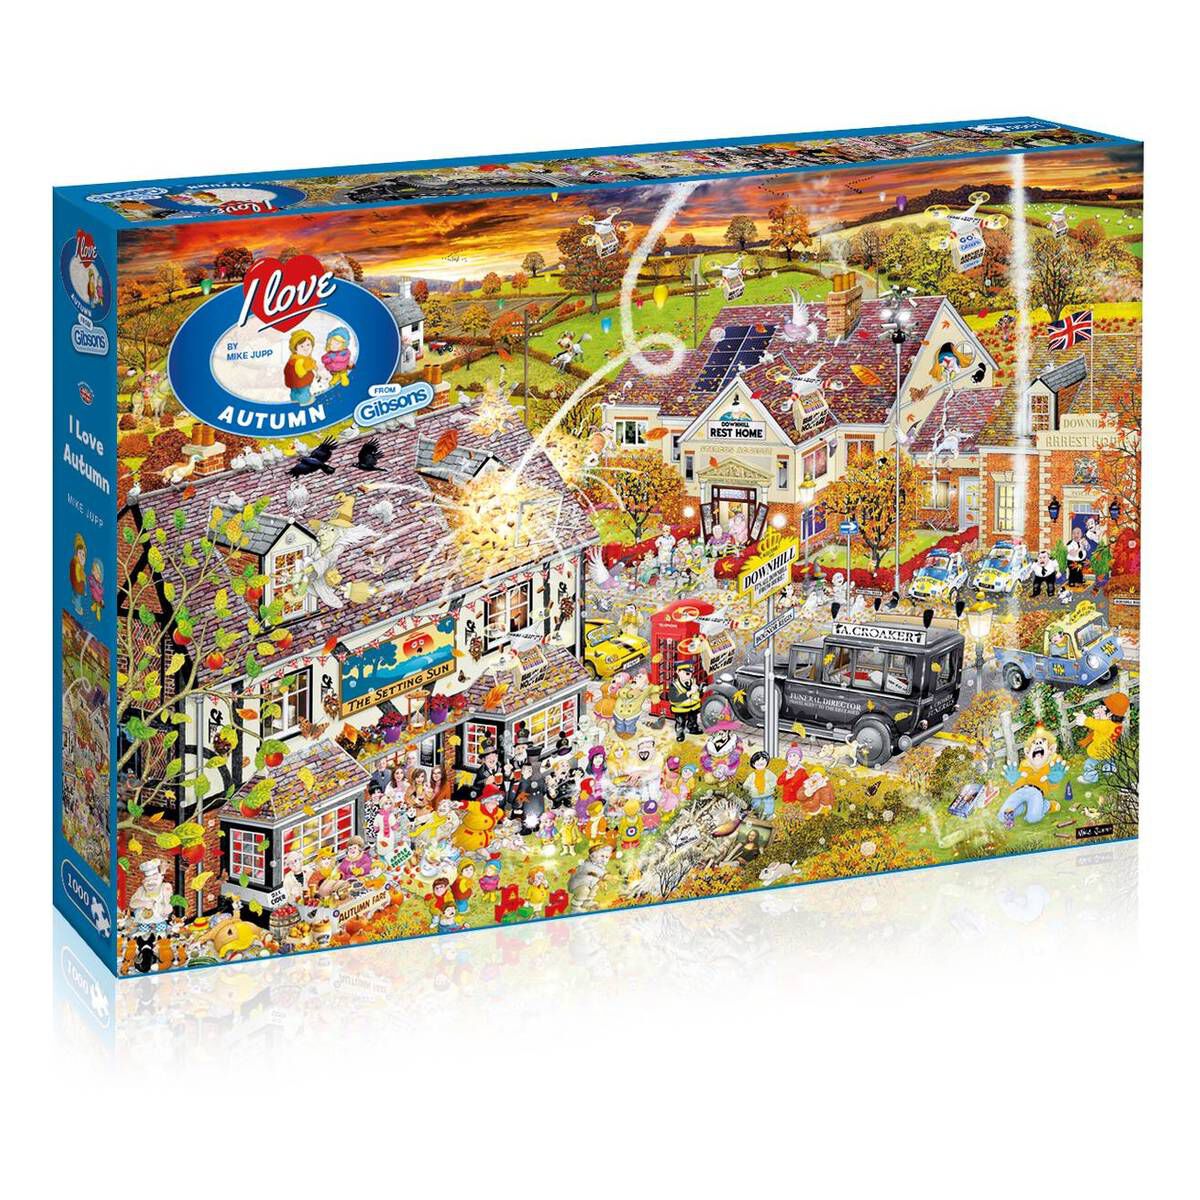 1000 Pieces Gibsons I Love Great Britain Jigsaw Puzzle 